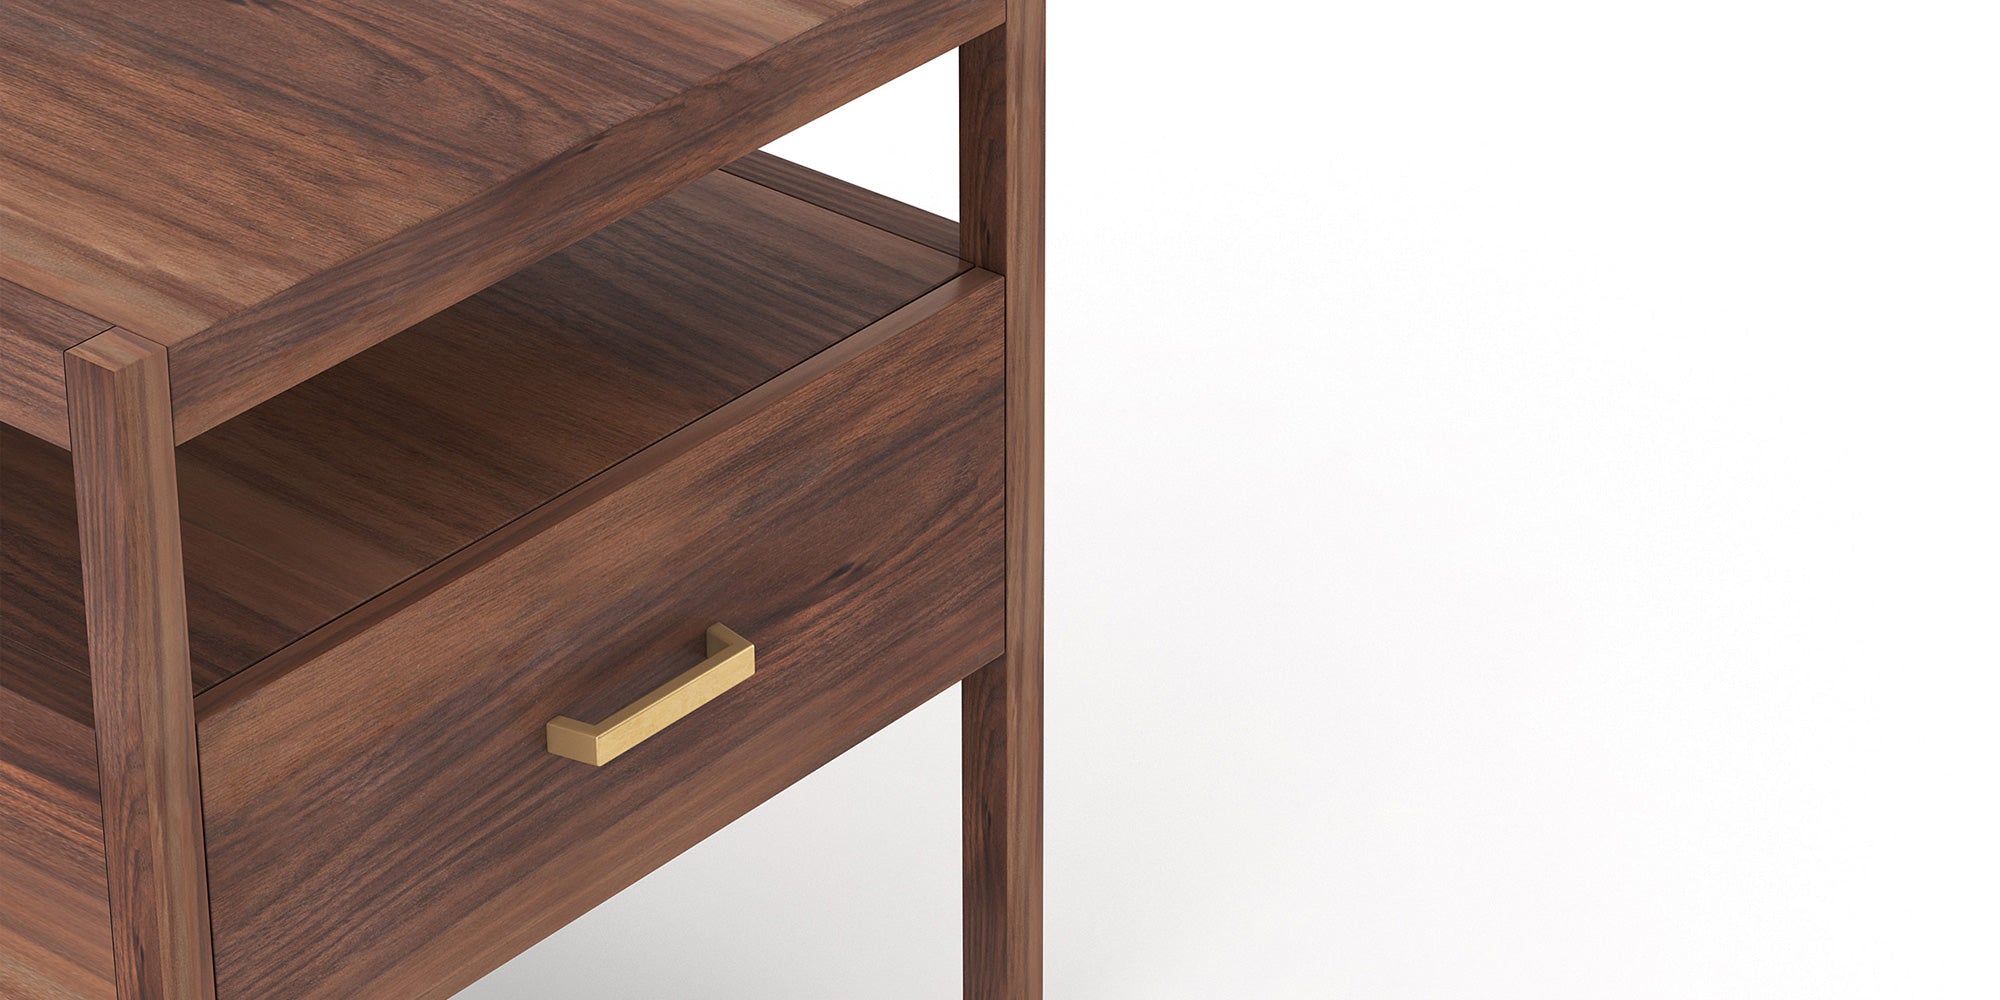 IRL: Shown in solid Walnut highlighting the decorative brass pull